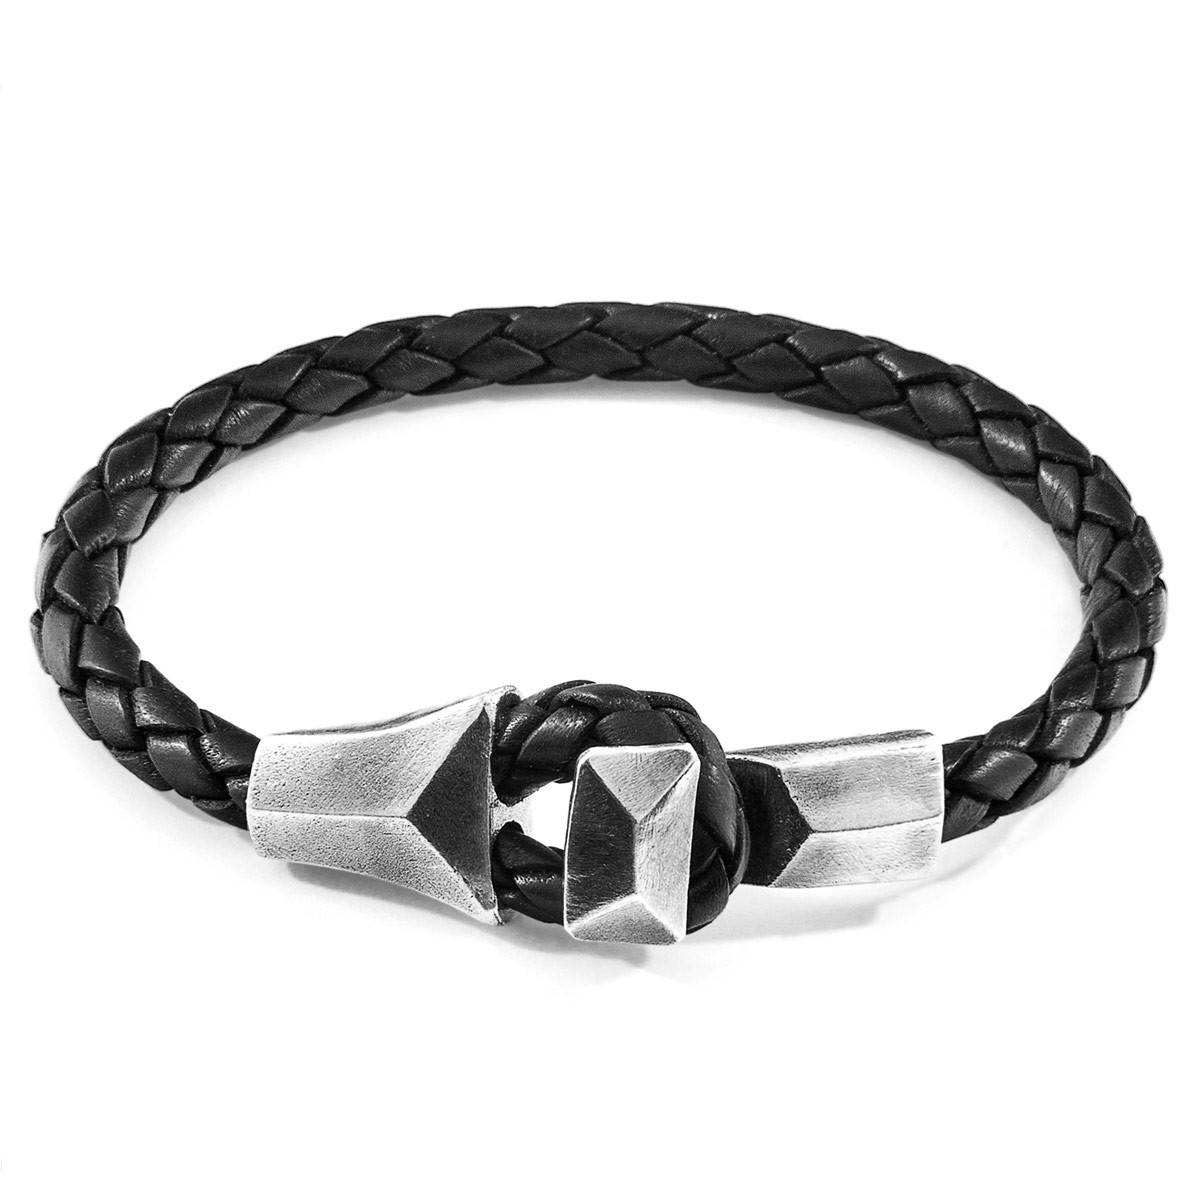 Anchor & Crew Midnight Black Alderney Silver and Braided Leather Bracelet